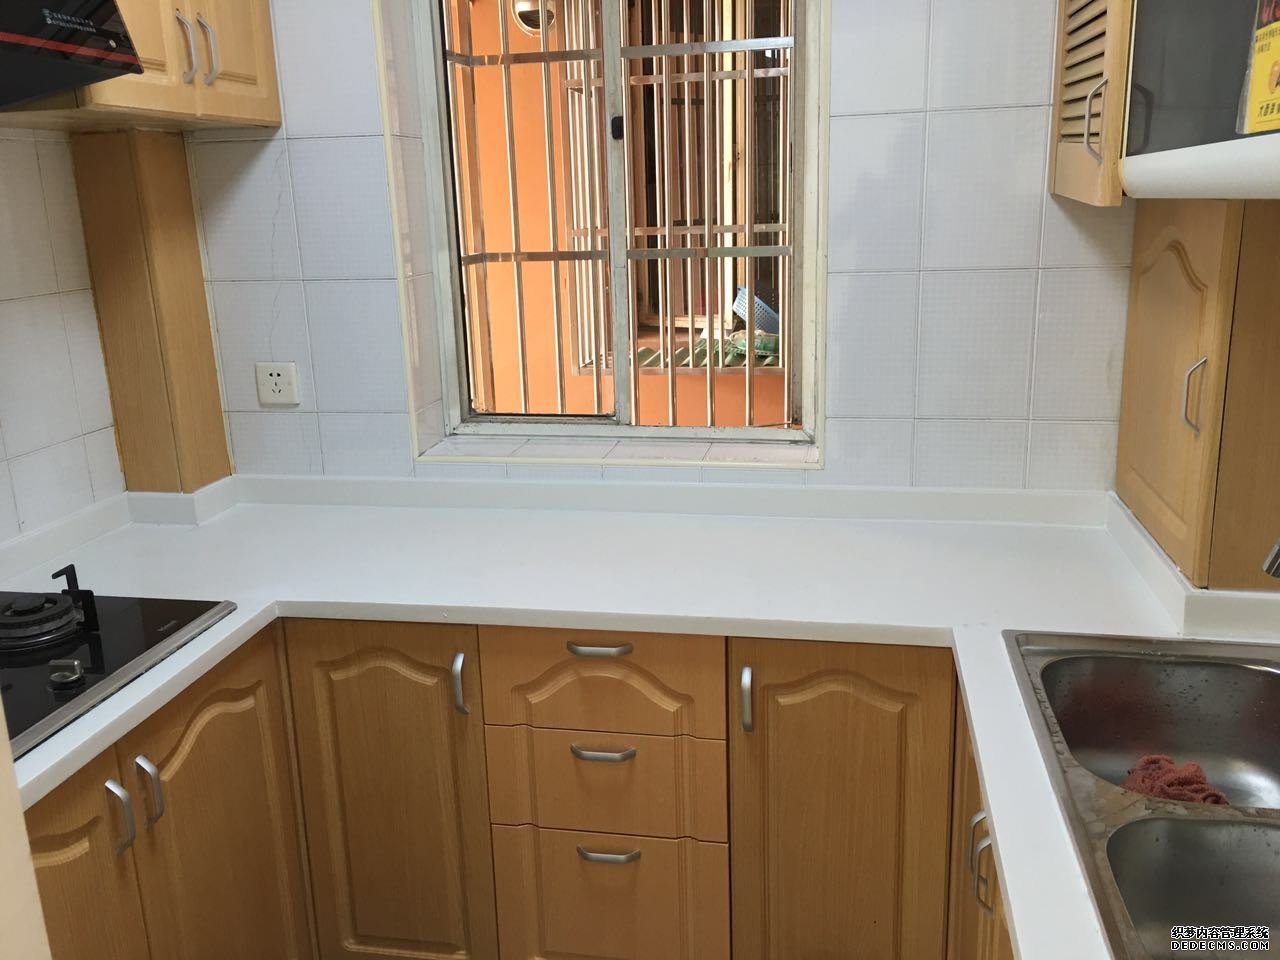 shanghai apartment for rent Well-priced 3BR Apt in Jingan, 500m to Line 7